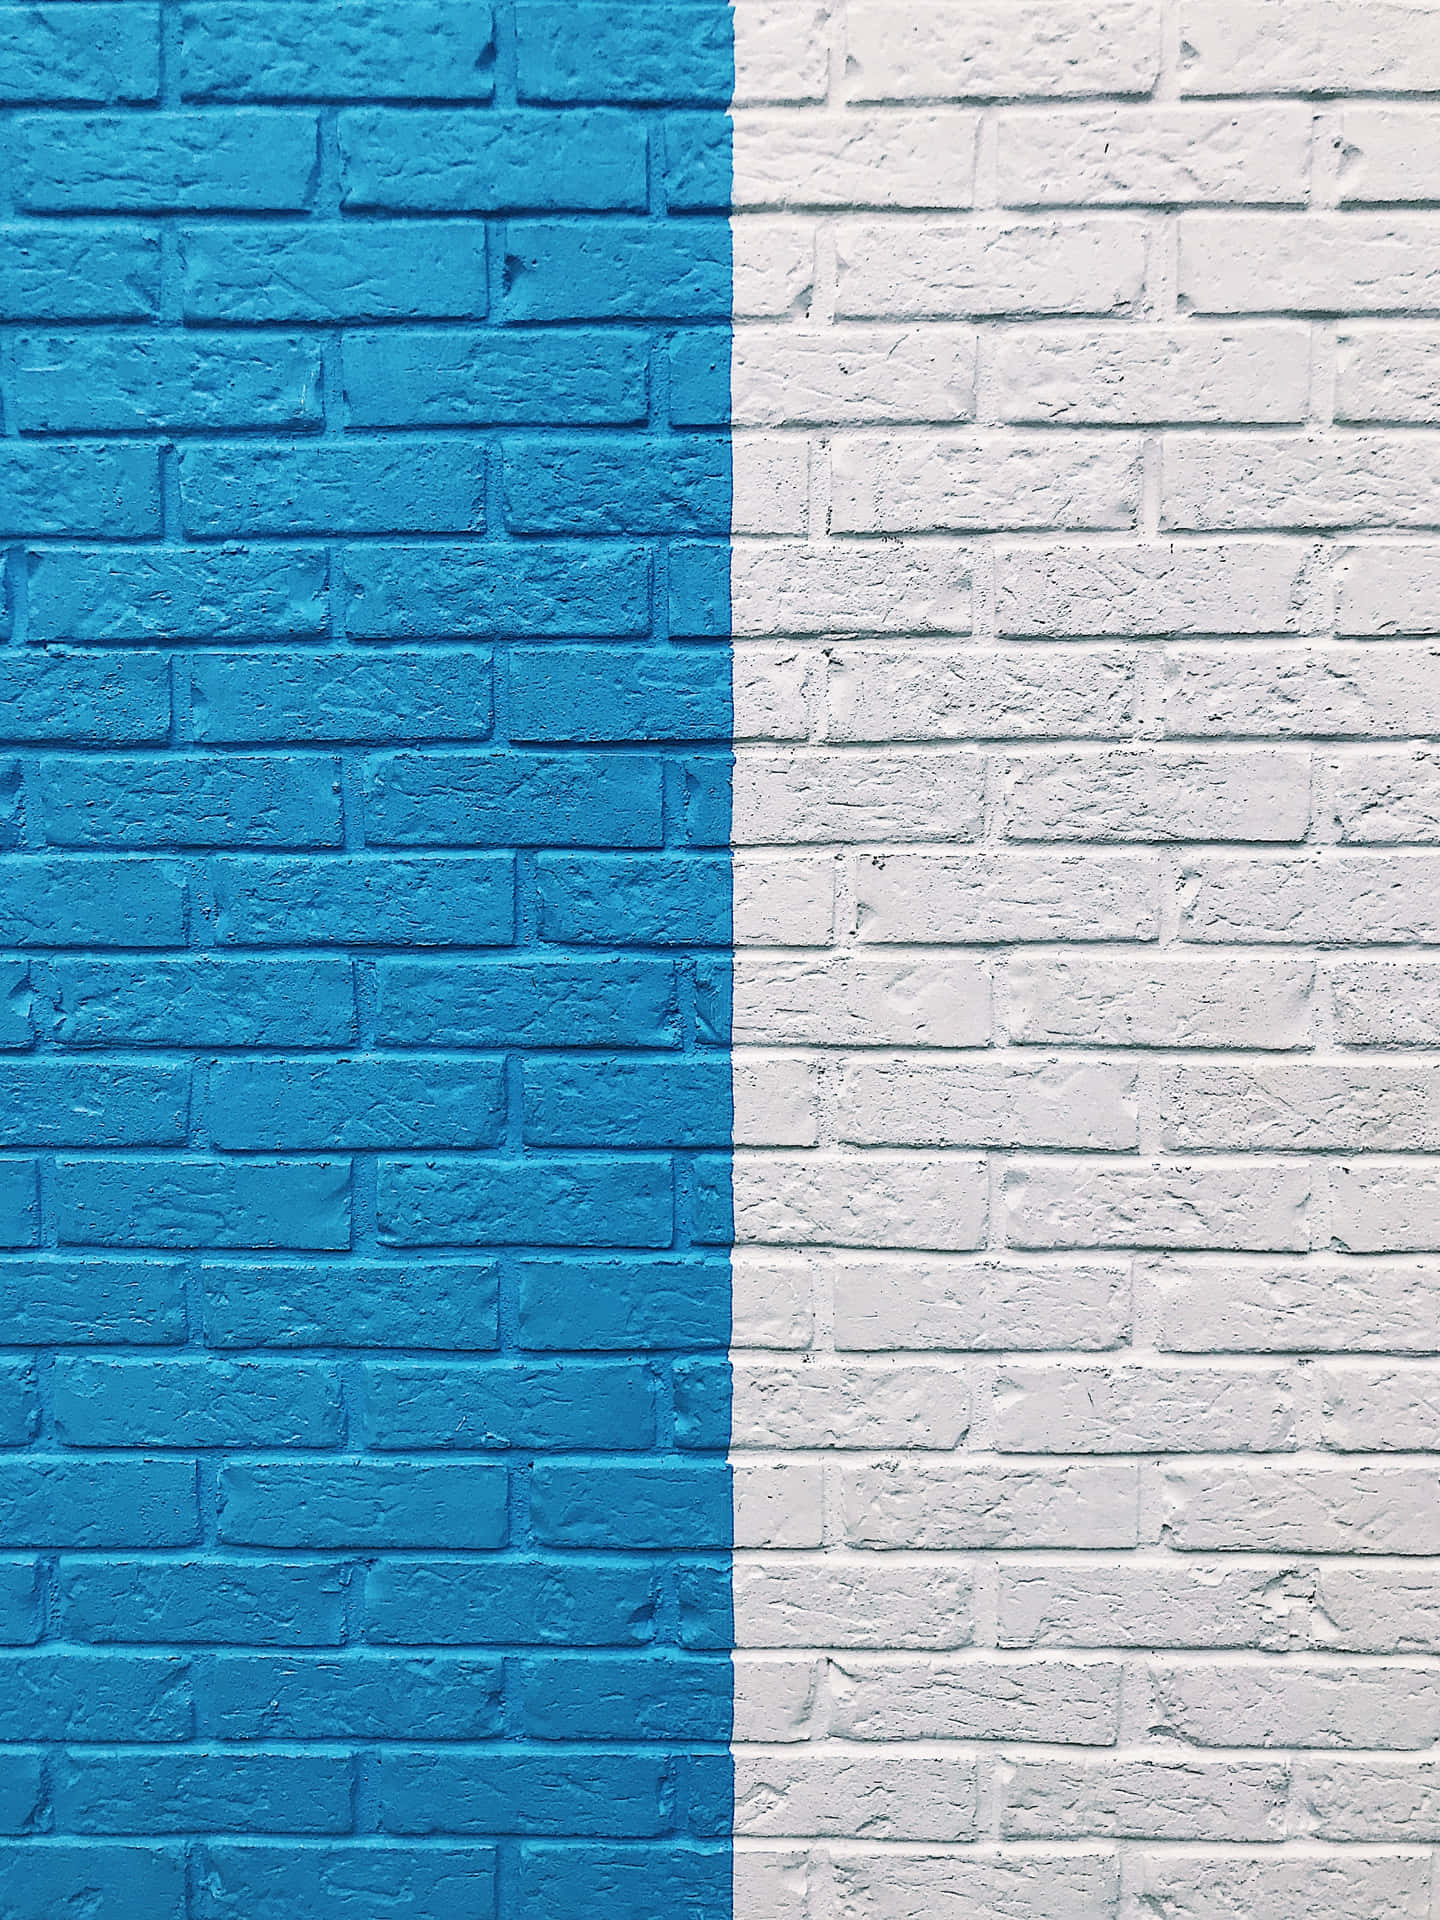 Blue And White Brick Wall Picsart Background